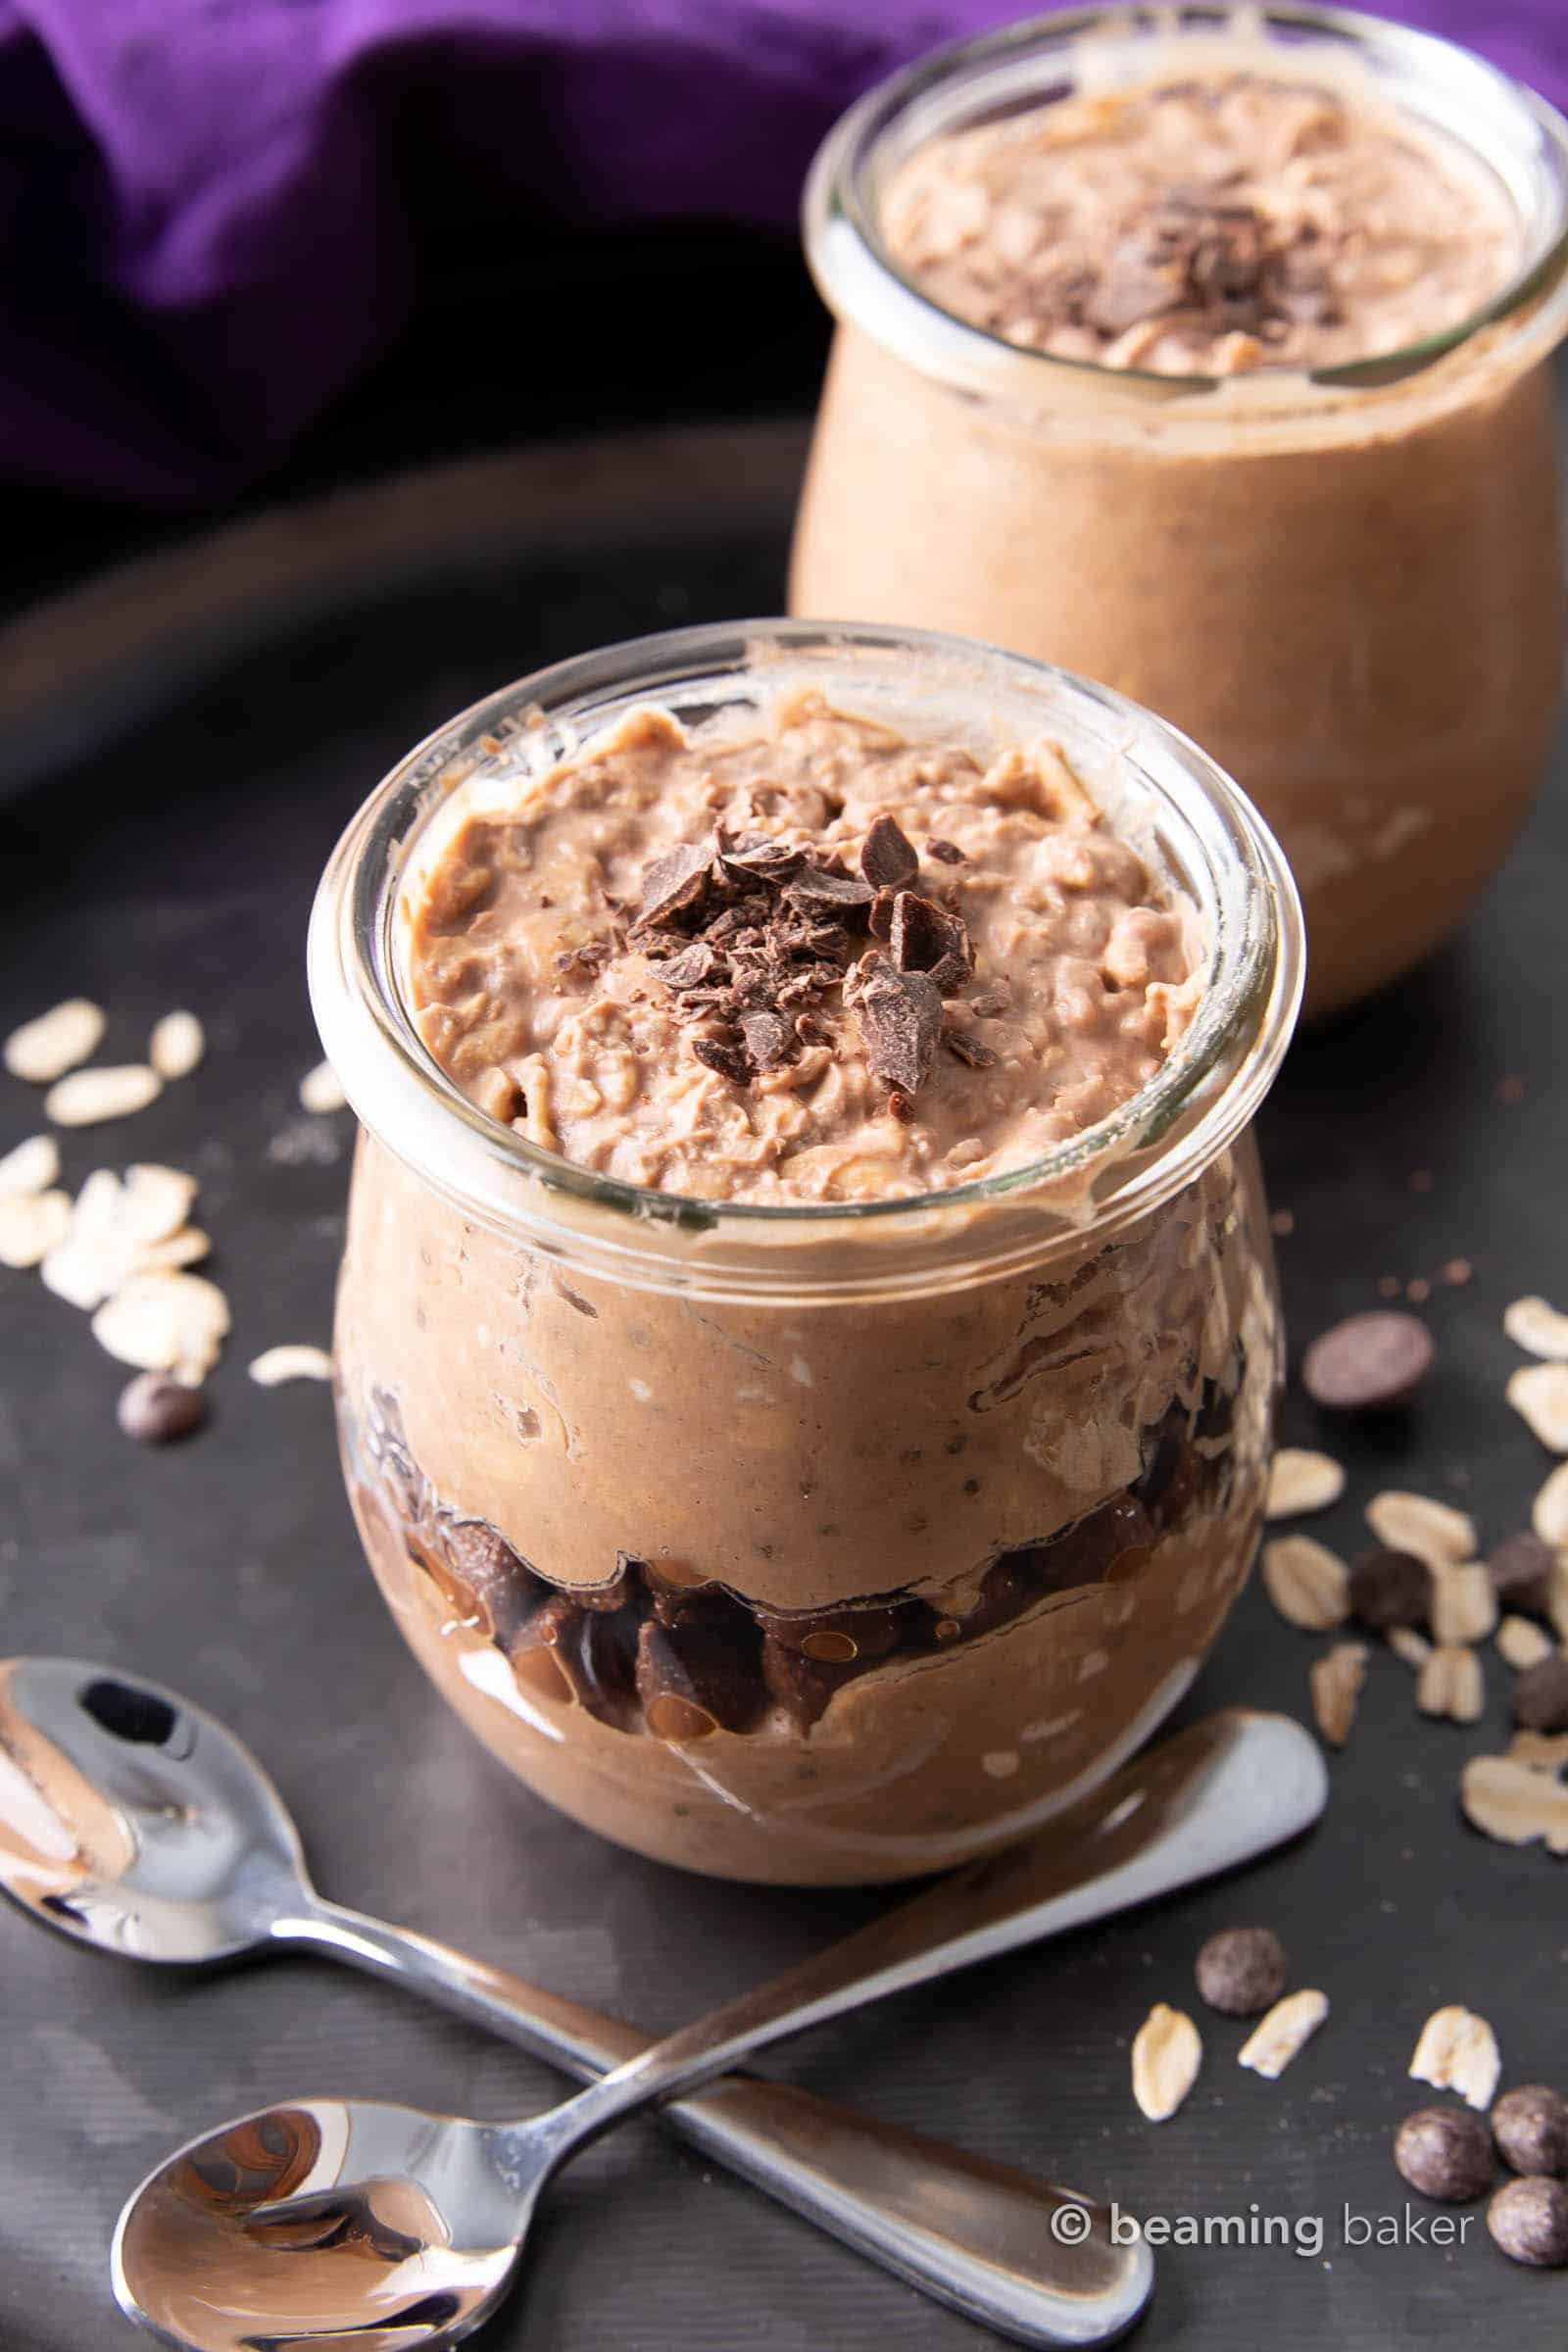 Chocolate Overnight Oats: the BEST chocolate overnight oats recipe—satisfyingly rich and deep chocolate taste with creamy vanilla goodness. Easy to make, Vegan. #Chocolate #OvernightOats #ChocolateOvernightOats #OvernightOatmeal | Recipe at BeamingBaker.com